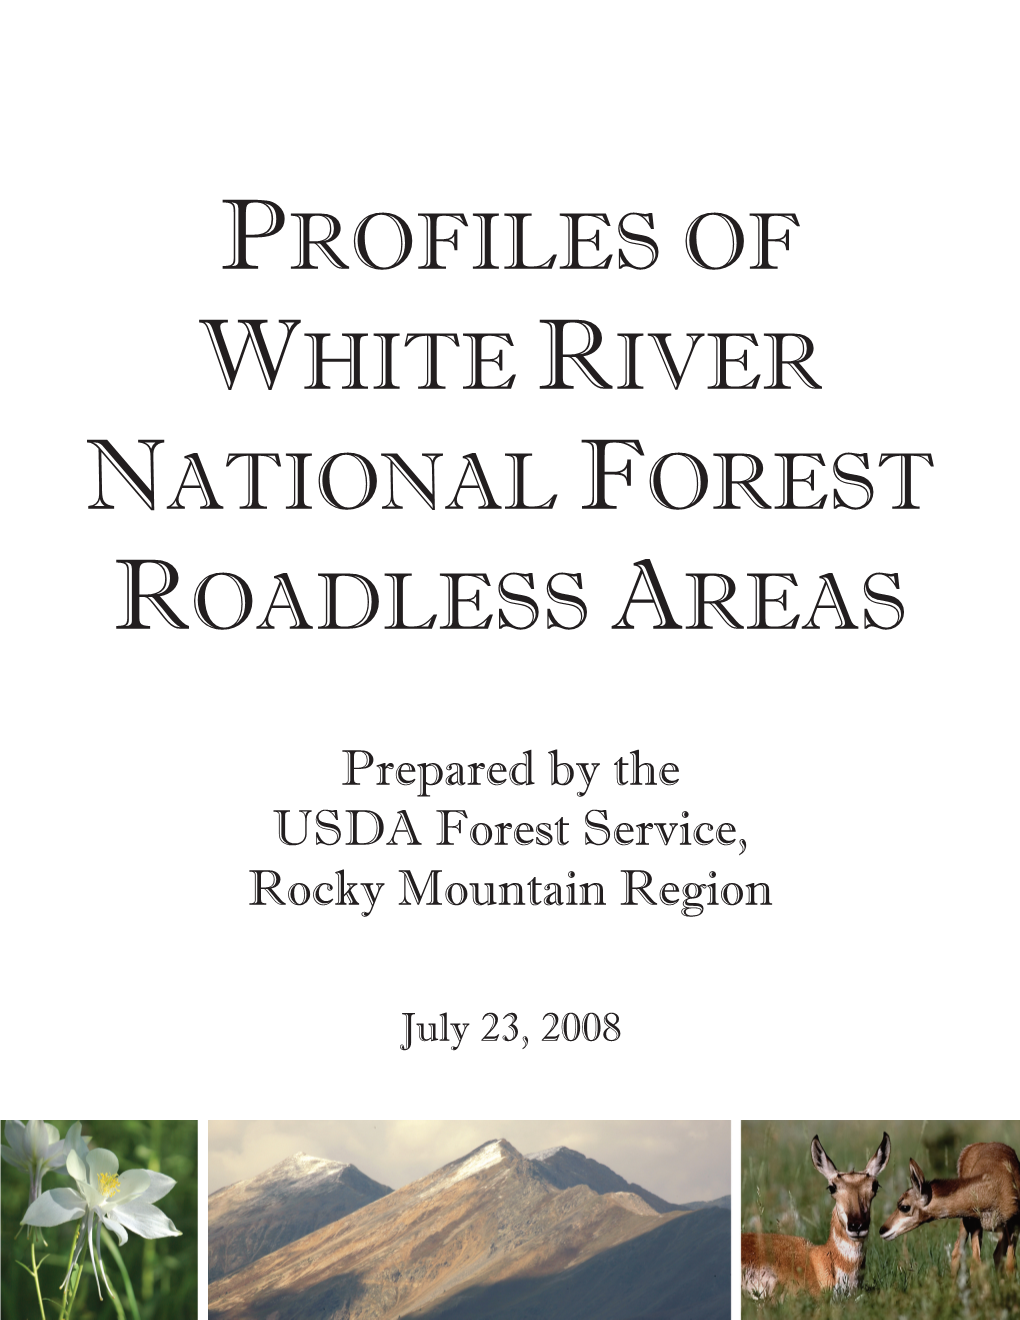 White River National Forest Roadless Areas